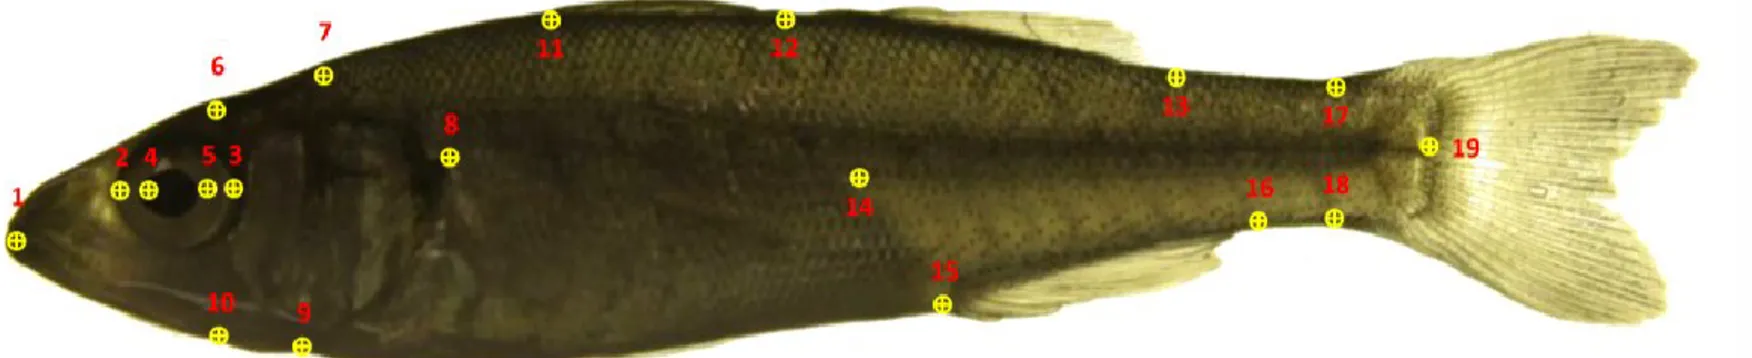 Figure 2. Position of landmarks on the surface of the fish. 